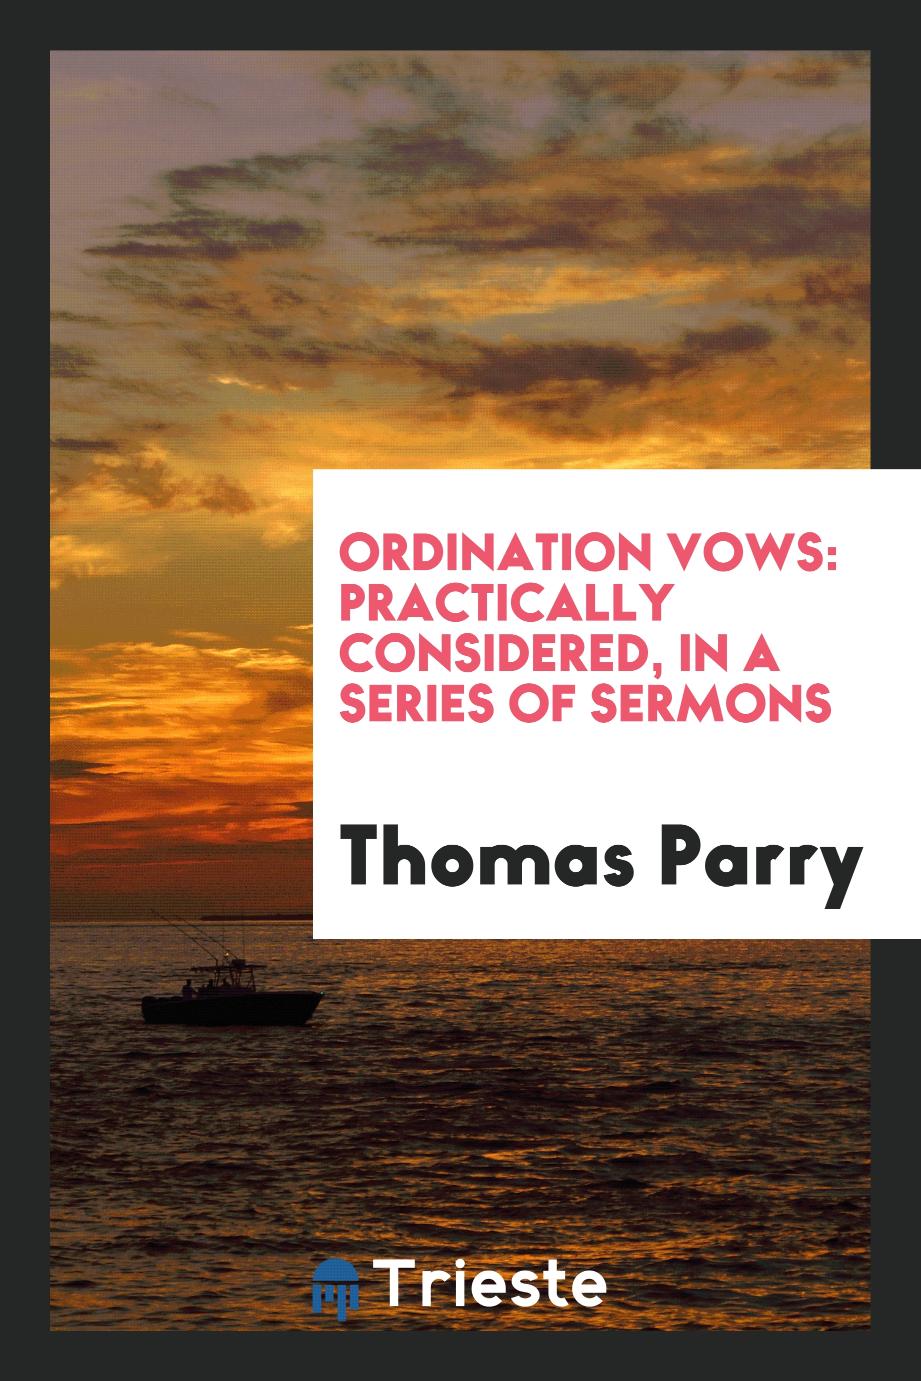 Ordination Vows: Practically Considered, in a Series of Sermons